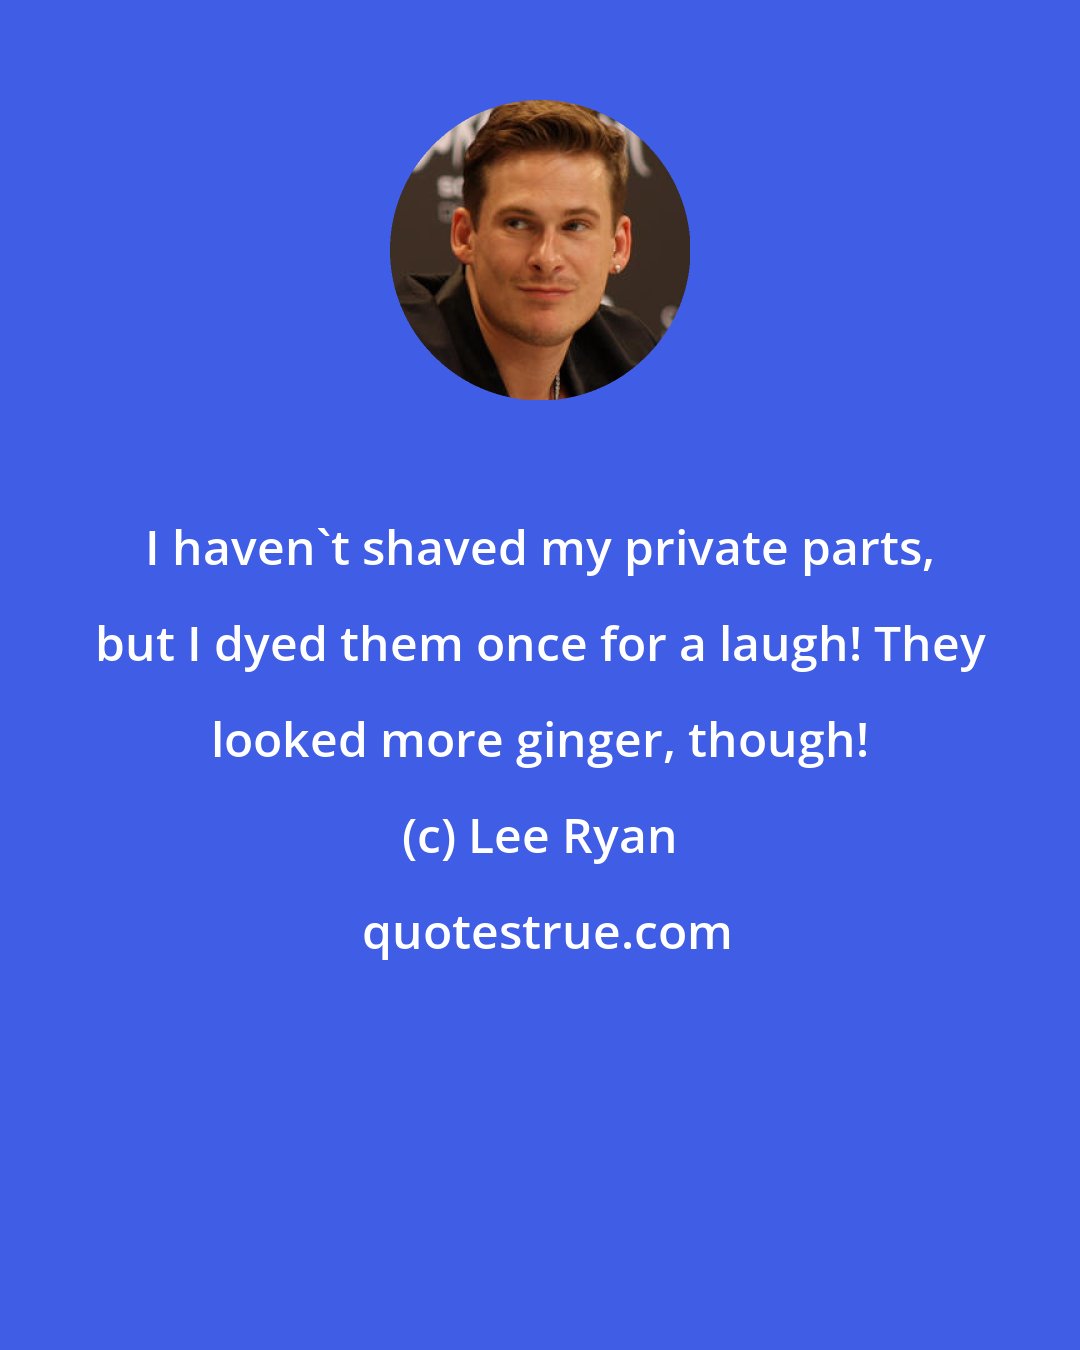 Lee Ryan: I haven't shaved my private parts, but I dyed them once for a laugh! They looked more ginger, though!